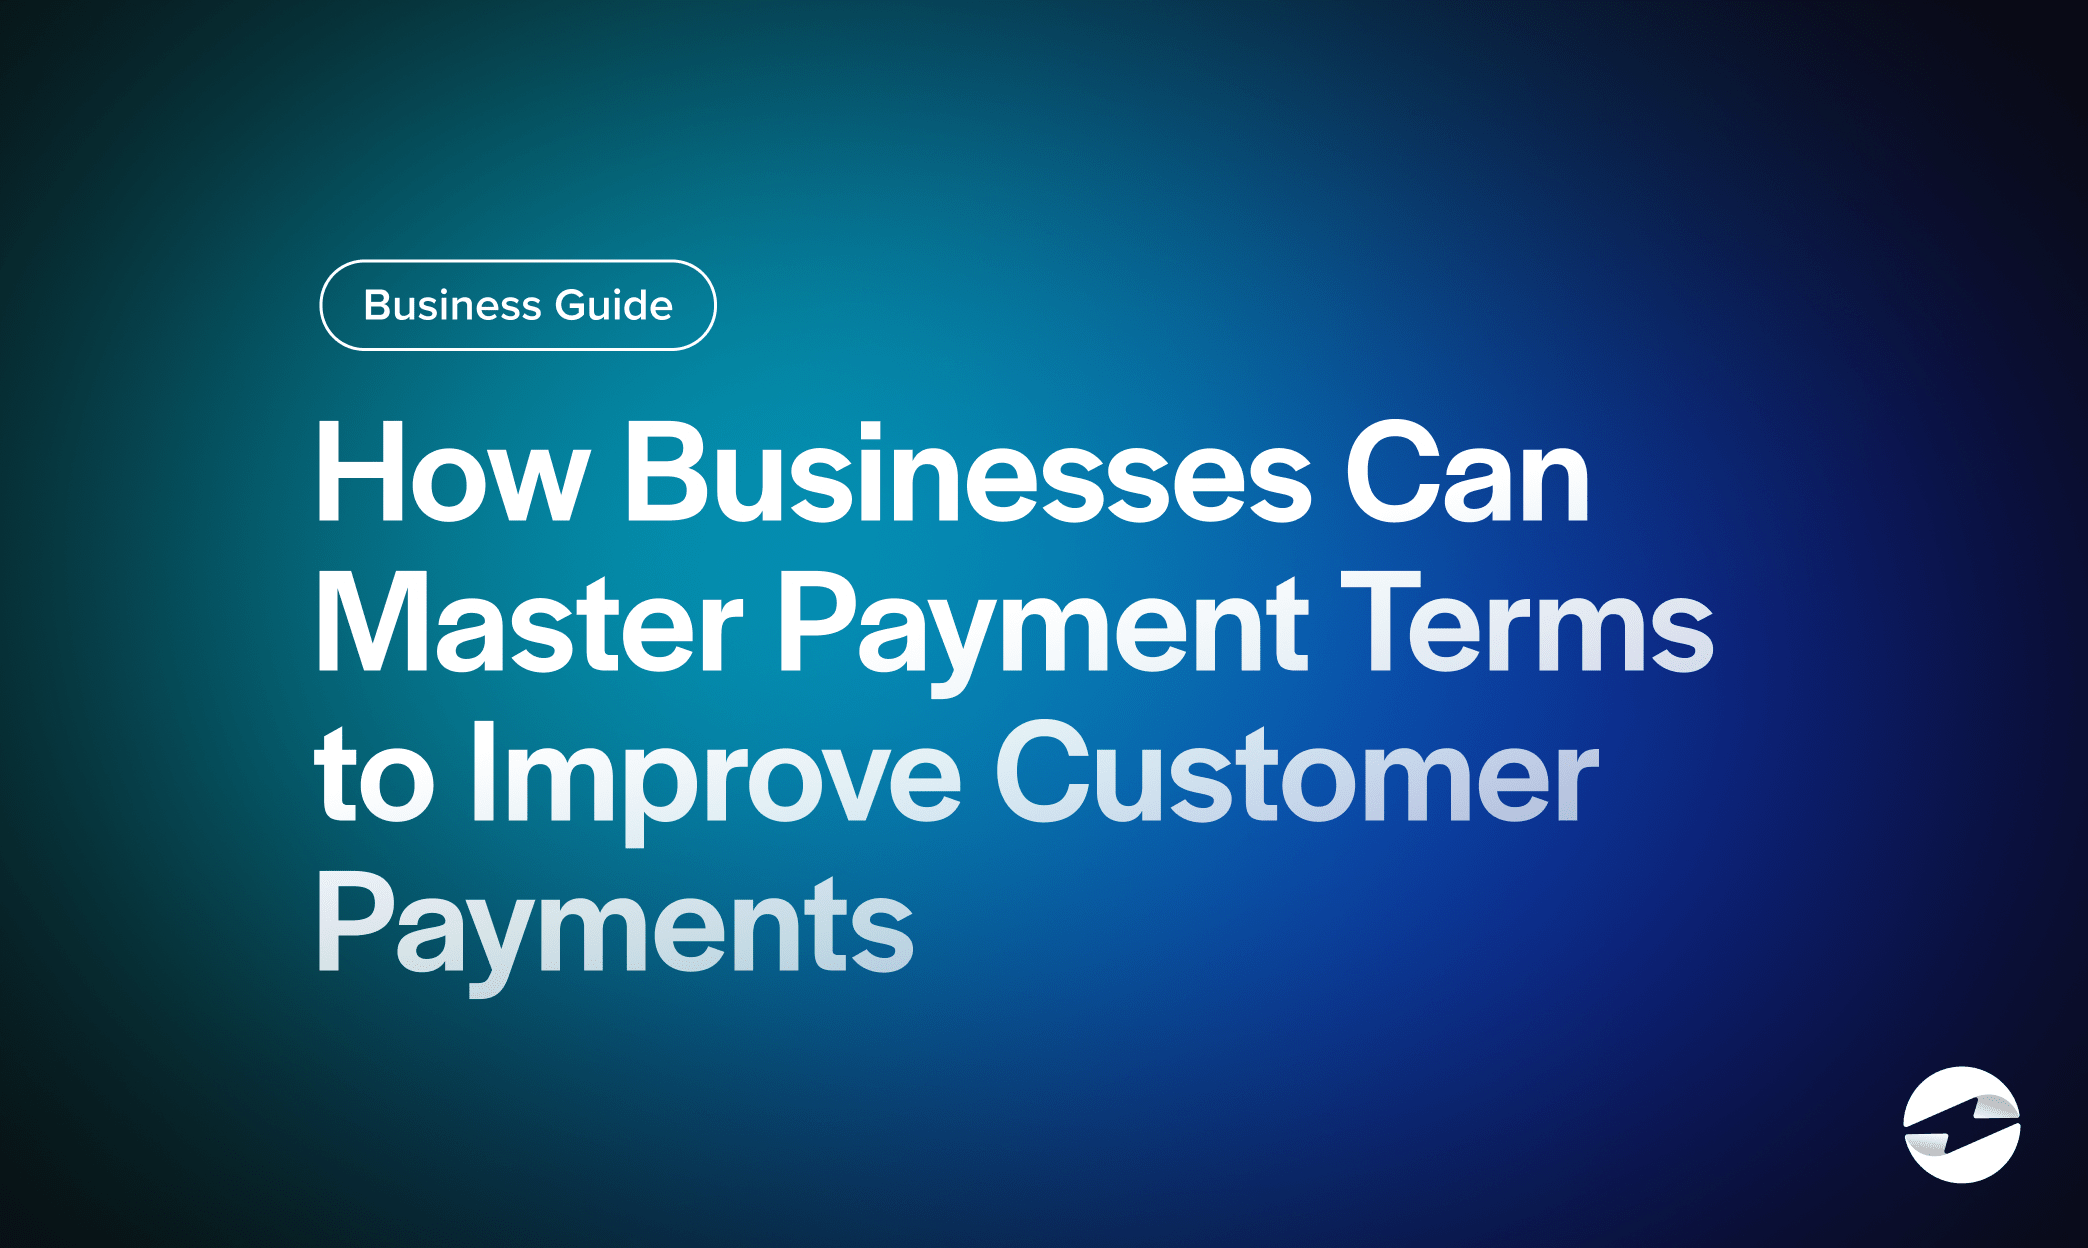 How Businesses Can Master Payment Terms to Improve Customer Payments